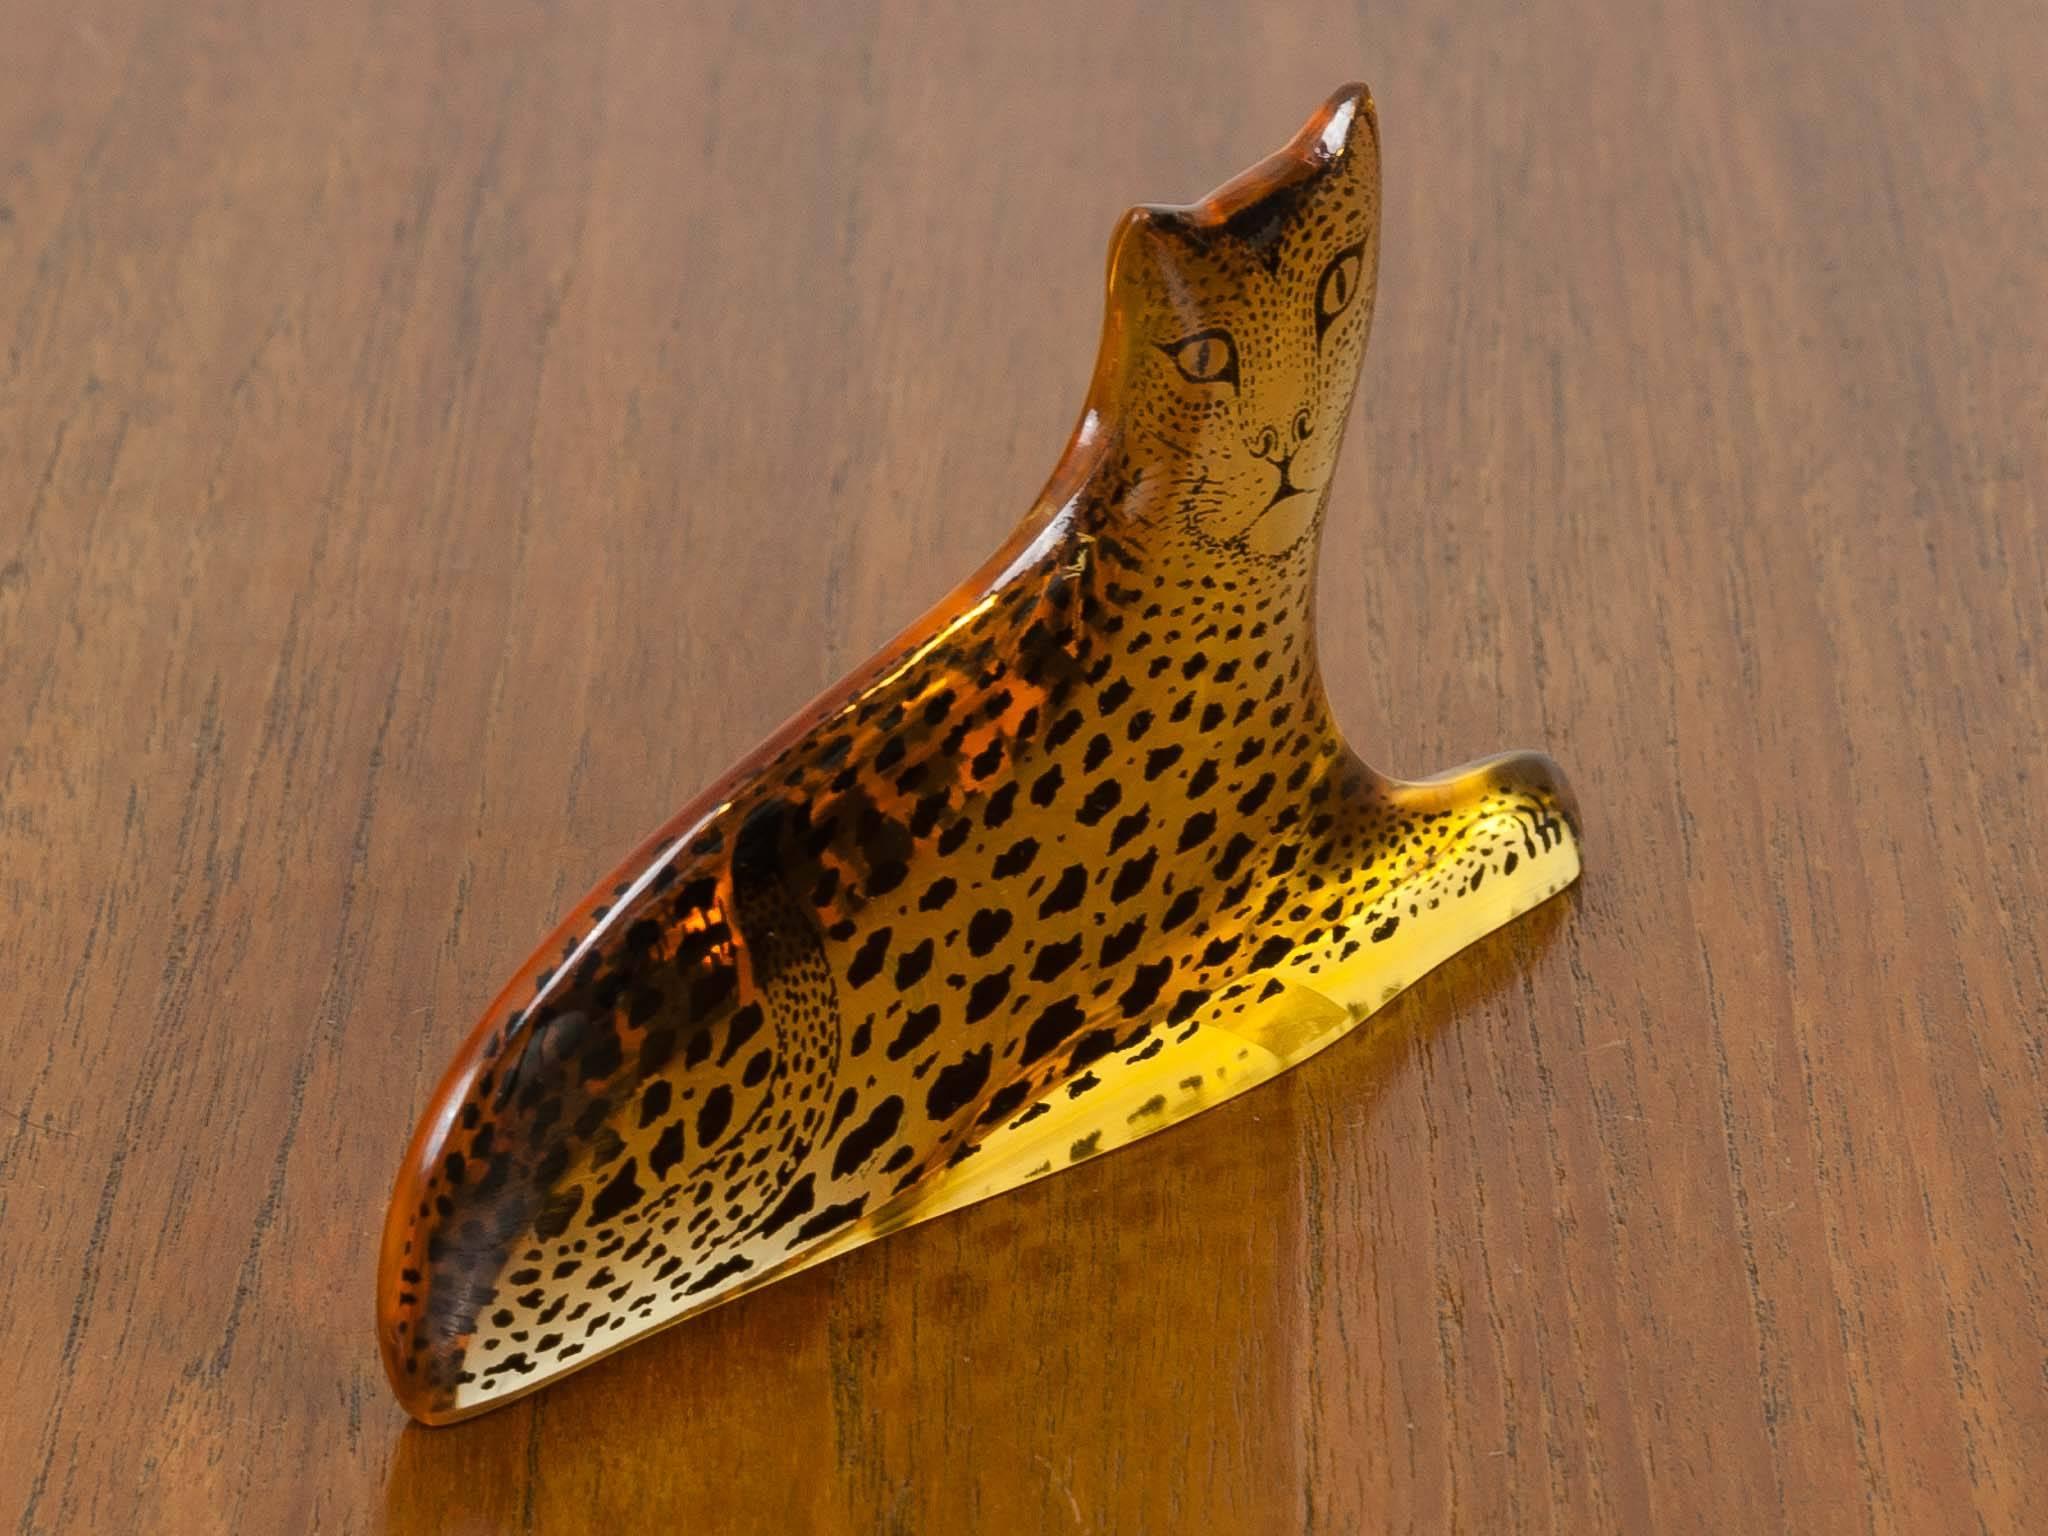 1970s Abraham Palatnik (b.1928) Leopard figurine manufactured from Lucite. The Brazilian Artist is famous for his kinechromatic art. Part of the Artimis Collection which features many different figurines of mainly animals. This could be the start of